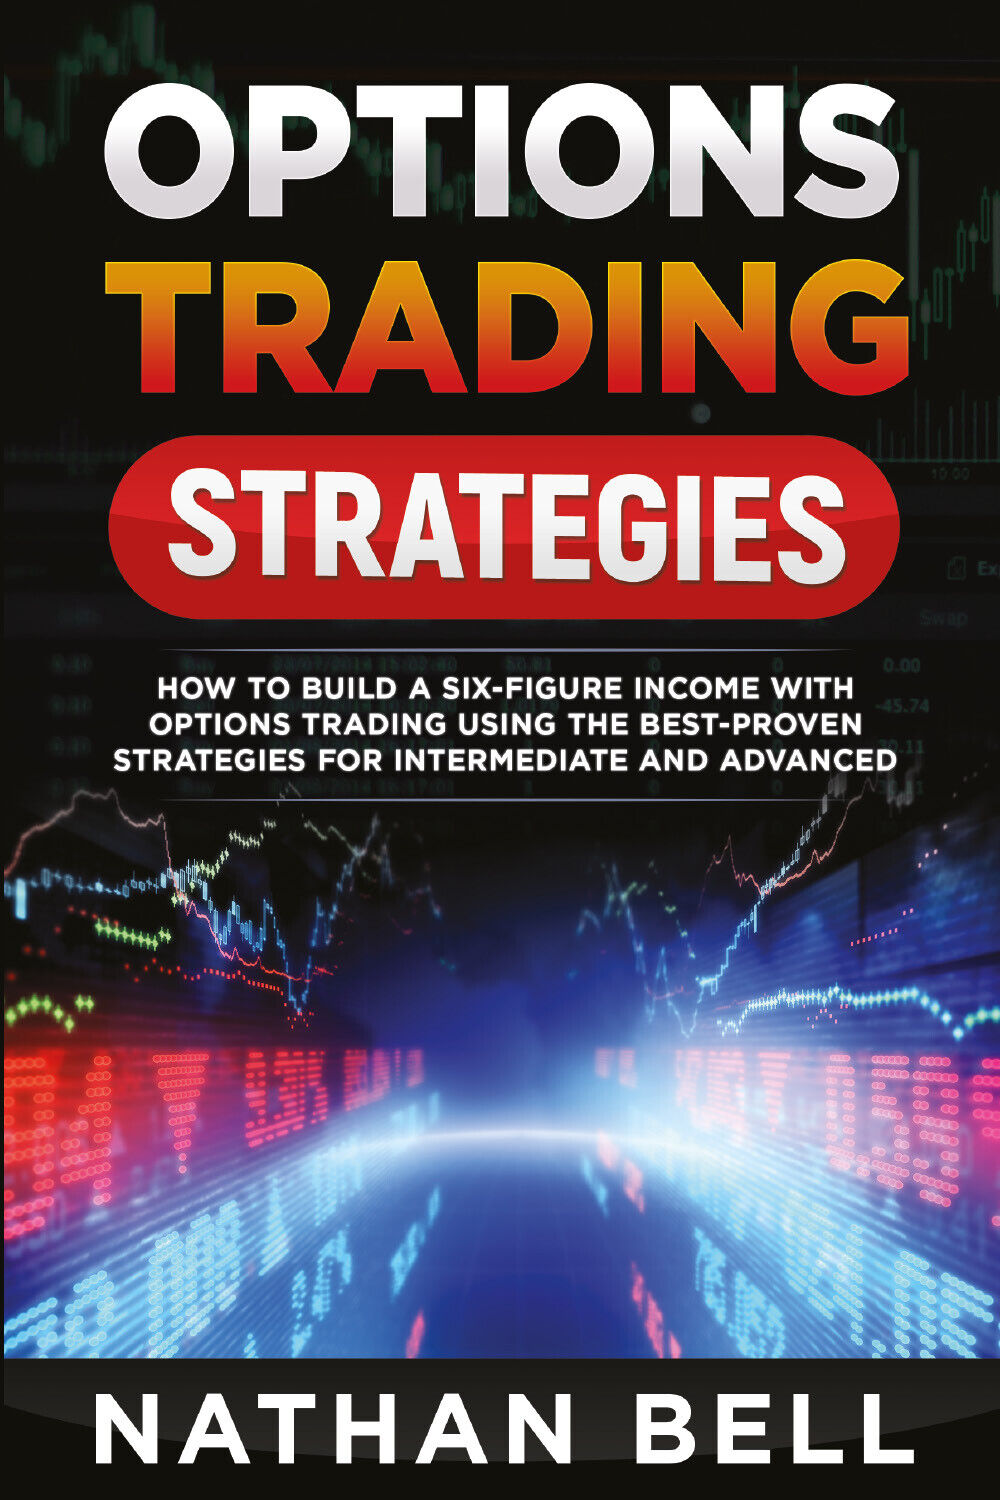 OPTIONS TRADING STRATEGIES di Nathan Bell,  2021,  Youcanprint